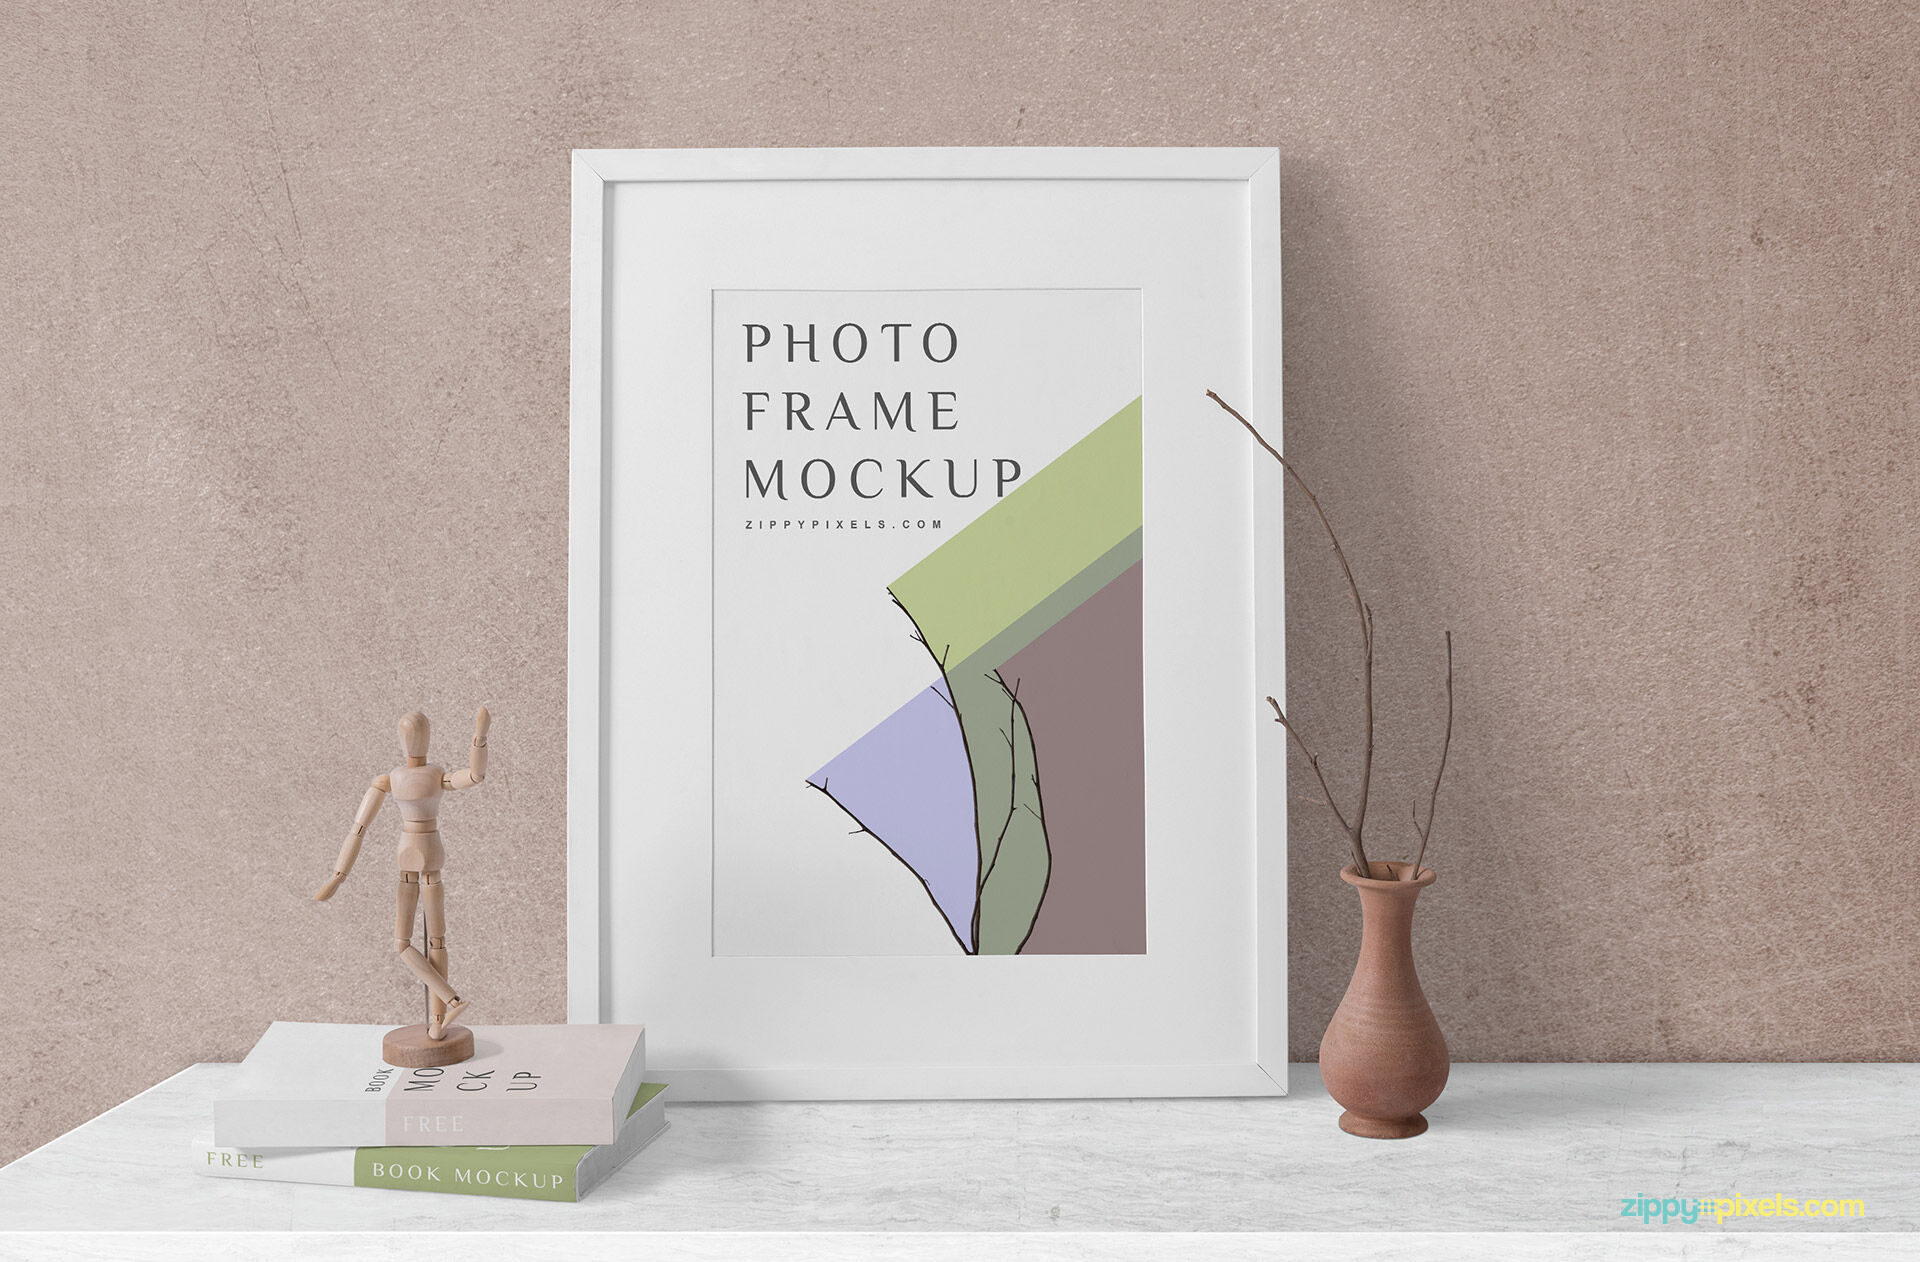 Wooden Frame Mockup with Books and Decorative Elements FREE PSD